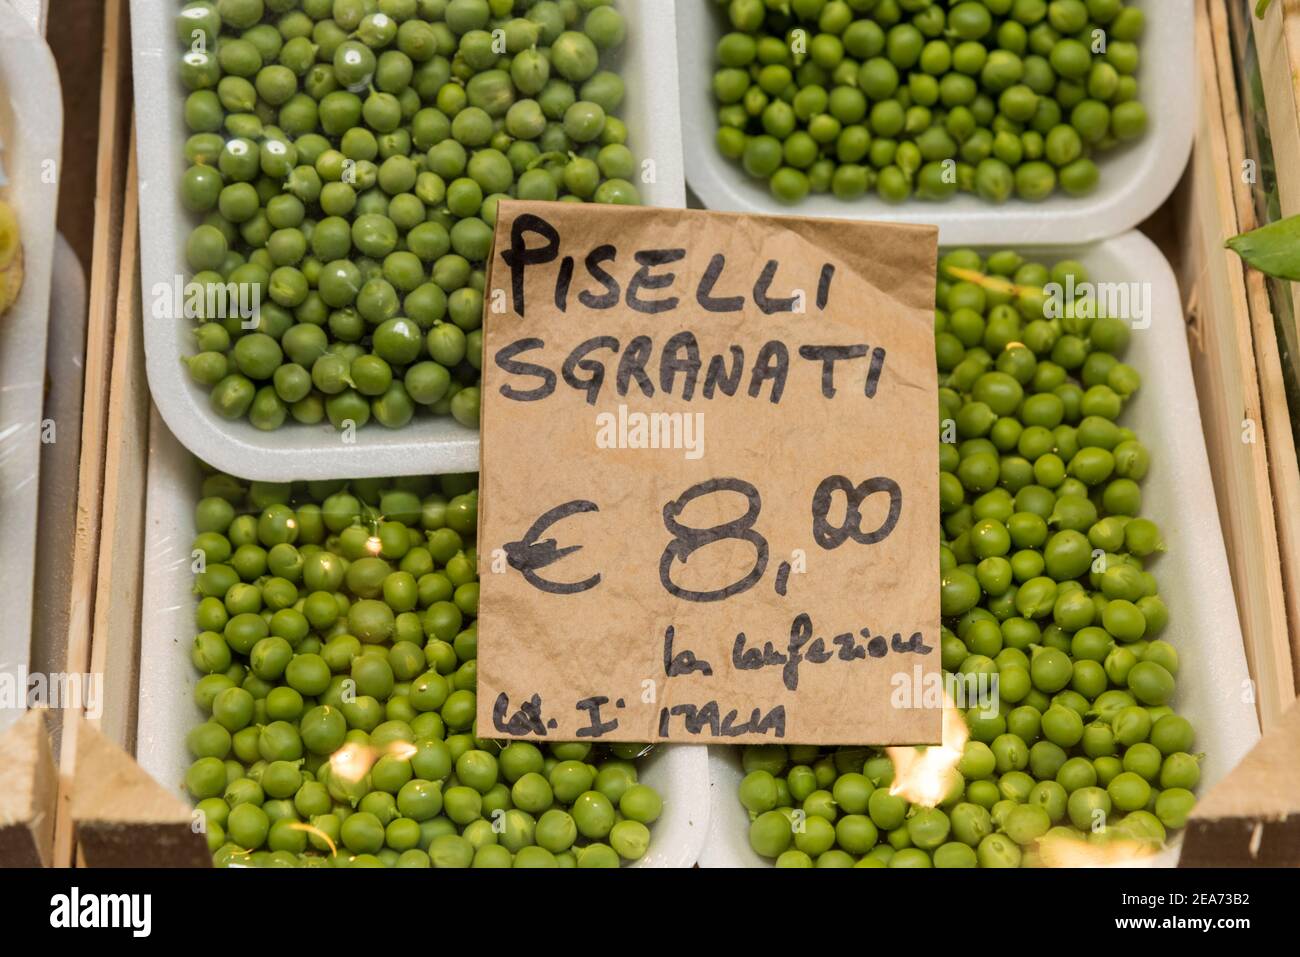 Fresh peas for sale on a market stall in Bologna Italy Stock Photo